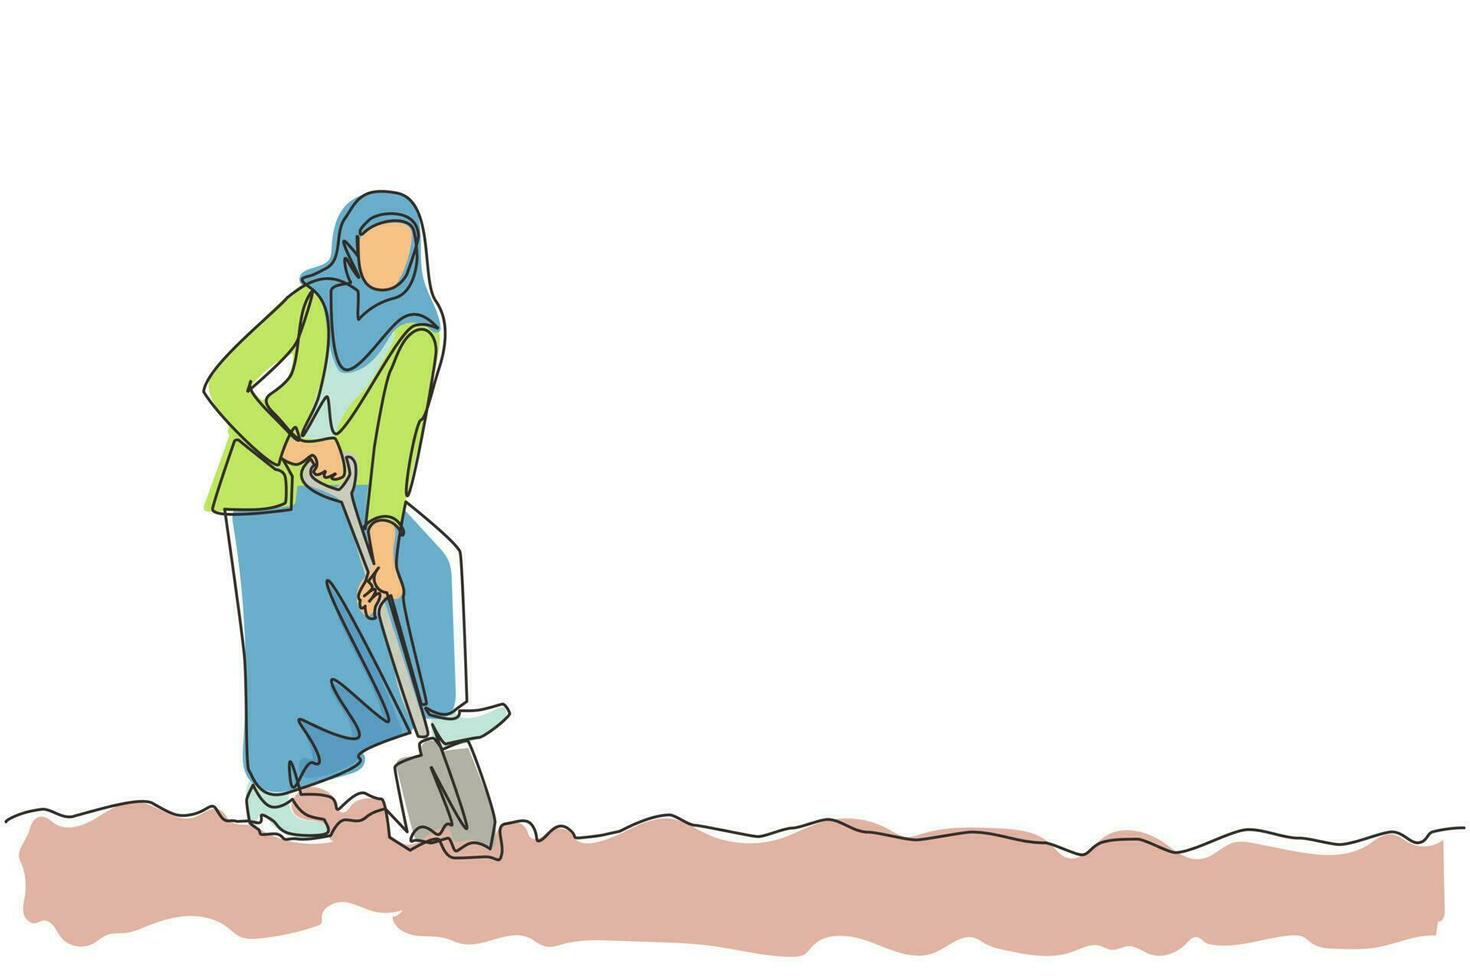 Single one line drawing Arabian businesswoman digging in dirt using shovel. Woman in hijab dig ground with spade. Business metaphor. Hard working process. Continuous line draw design graphic vector